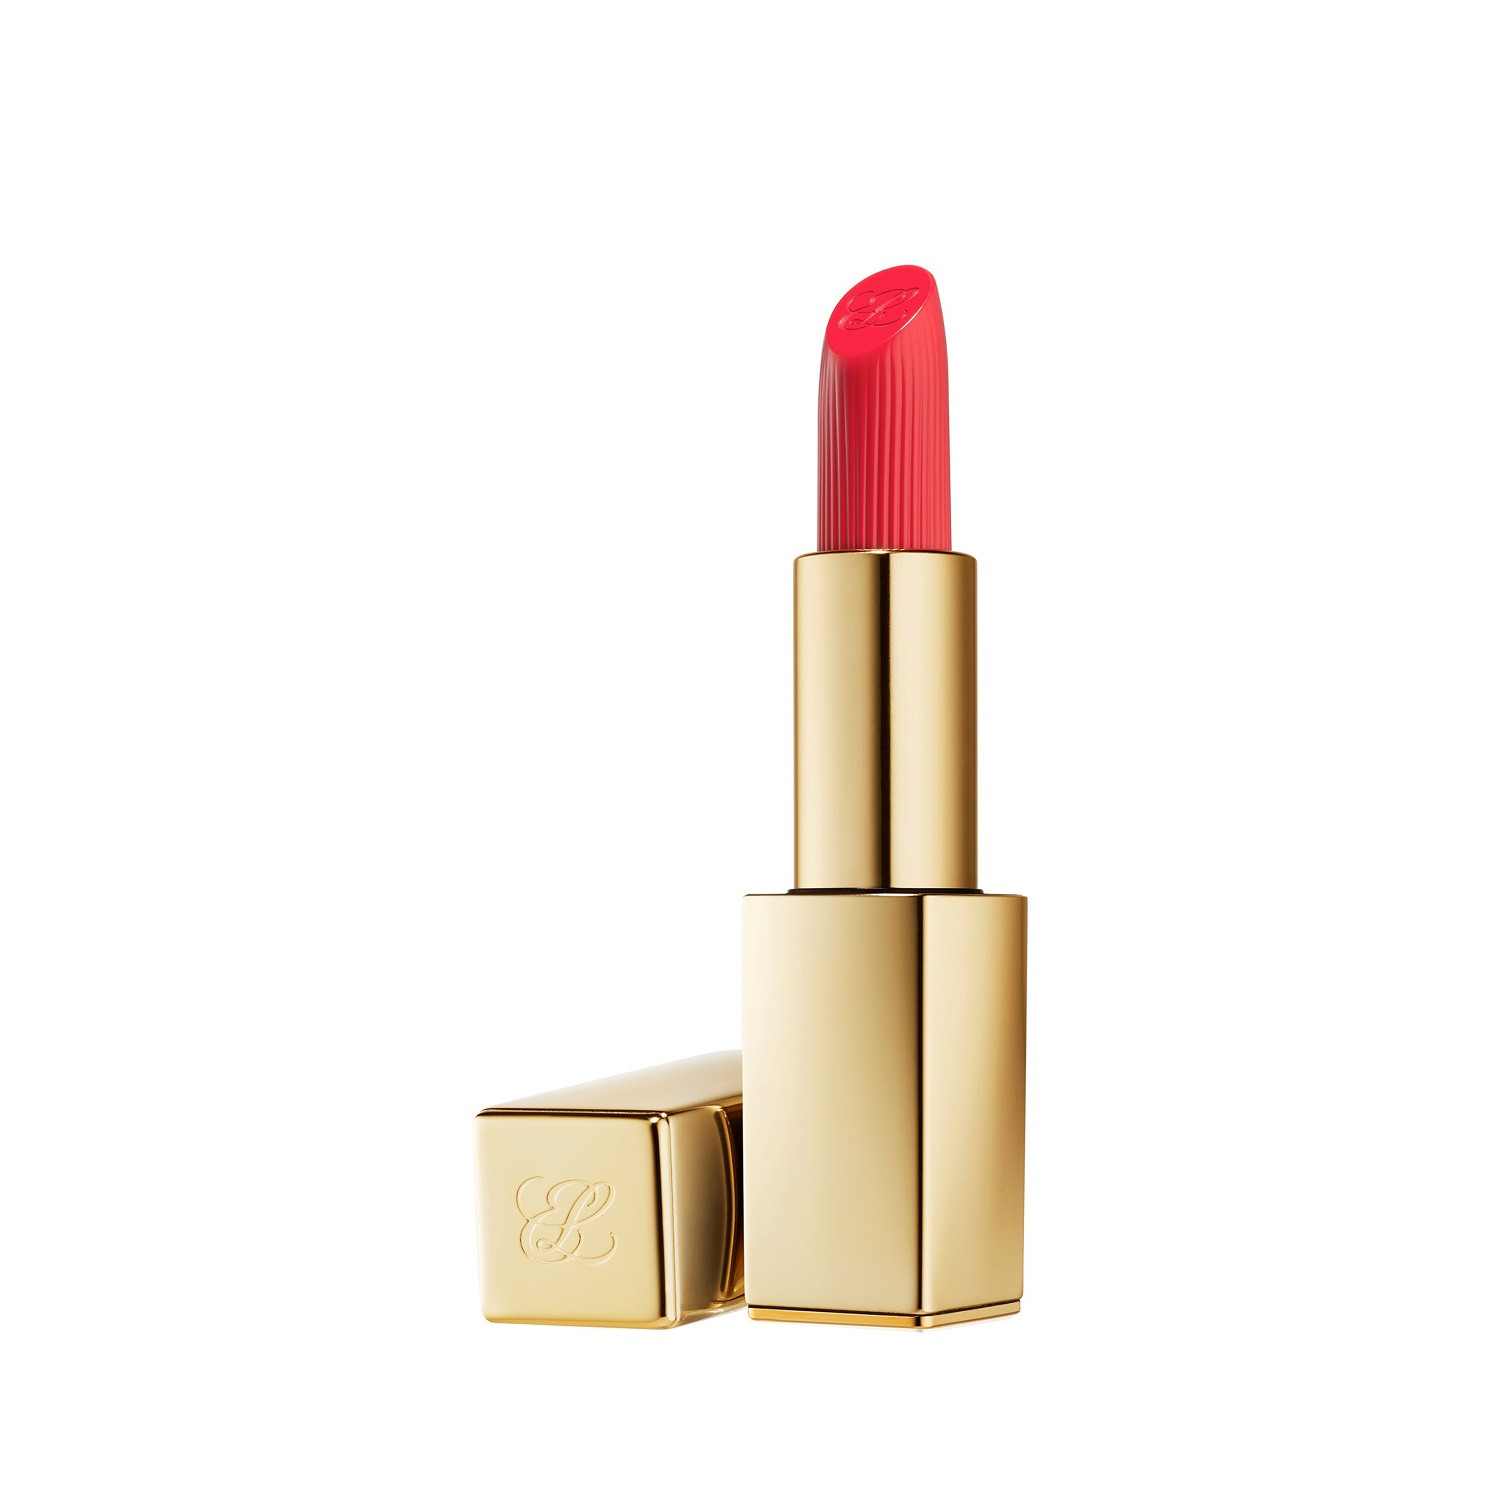 PURE COLOR creme lipstick - 330 Impassioned, Light Red, large image number 0